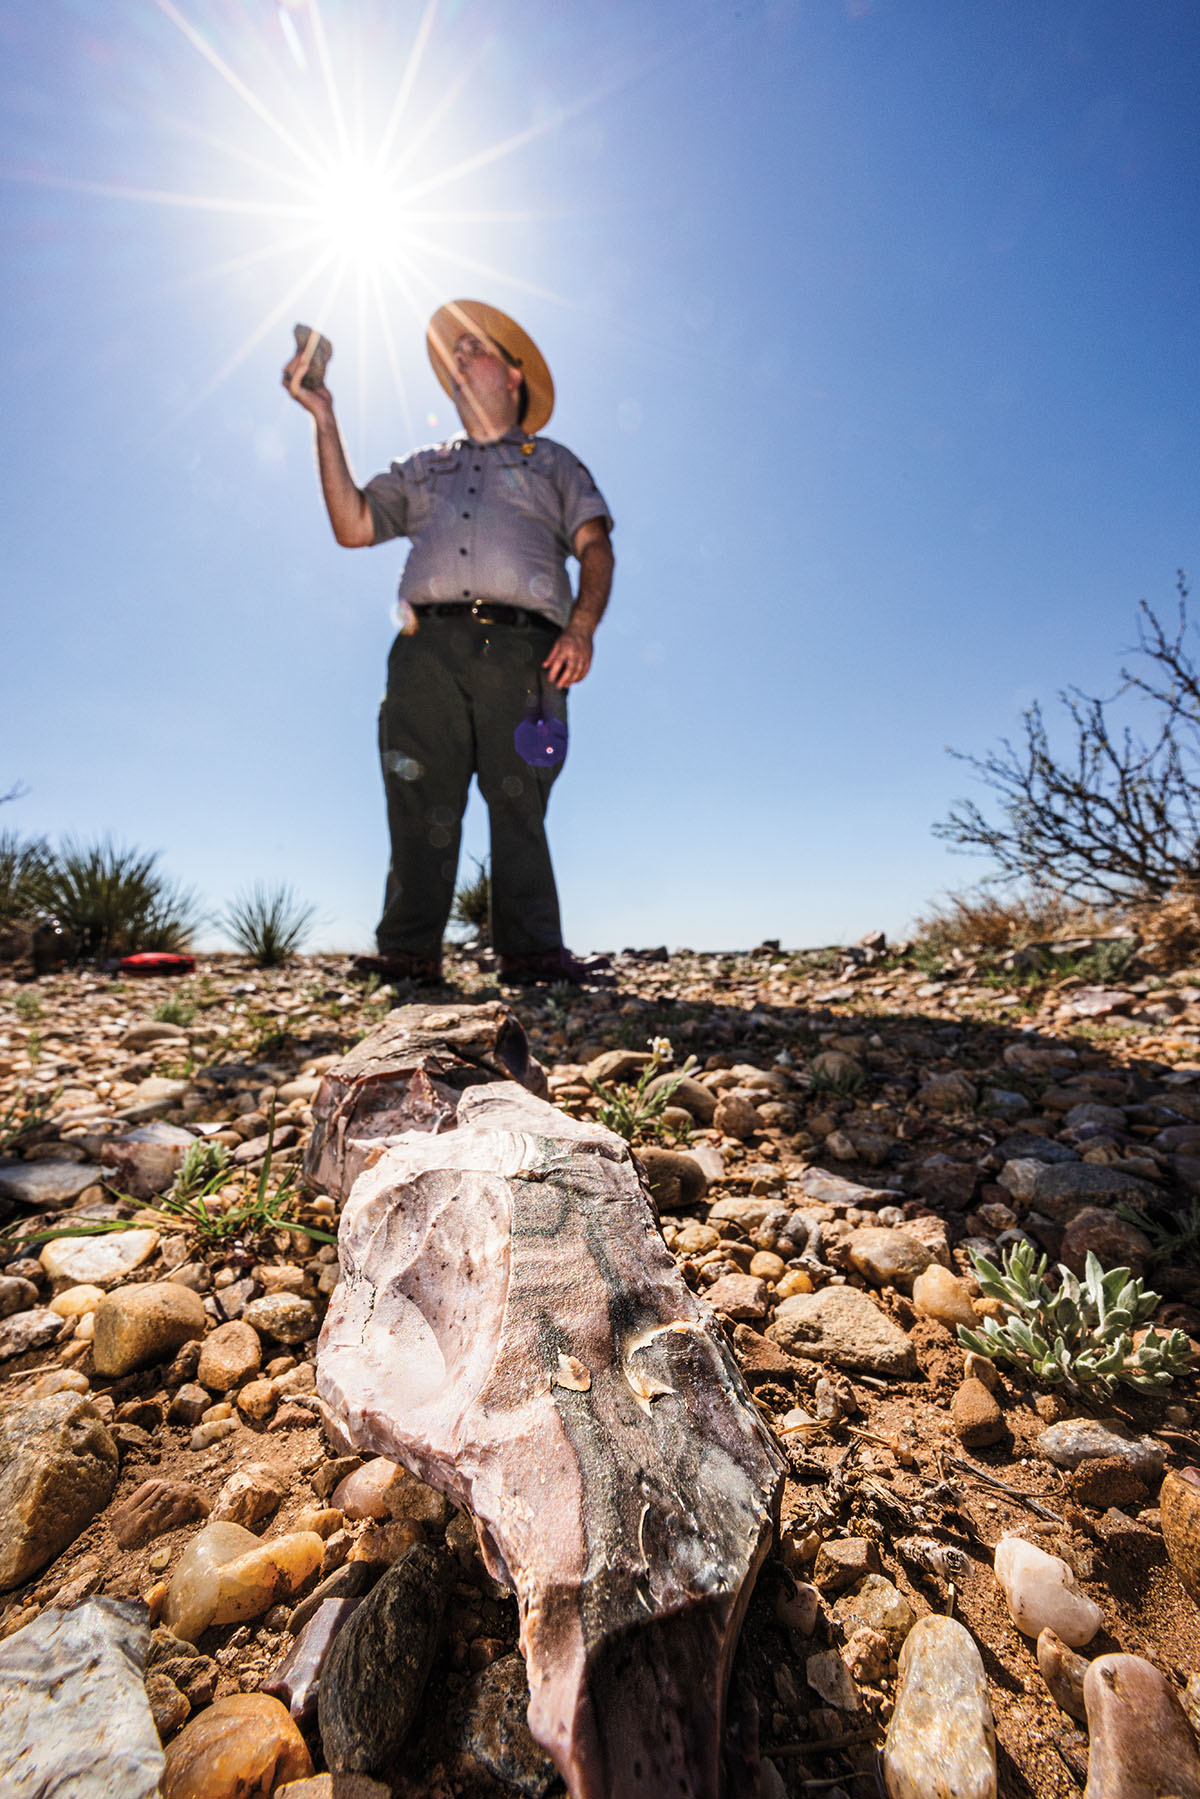 A National Parks Service ranger holds a specimen in the sunlight on a rocky landscape in front of a unique rock formation